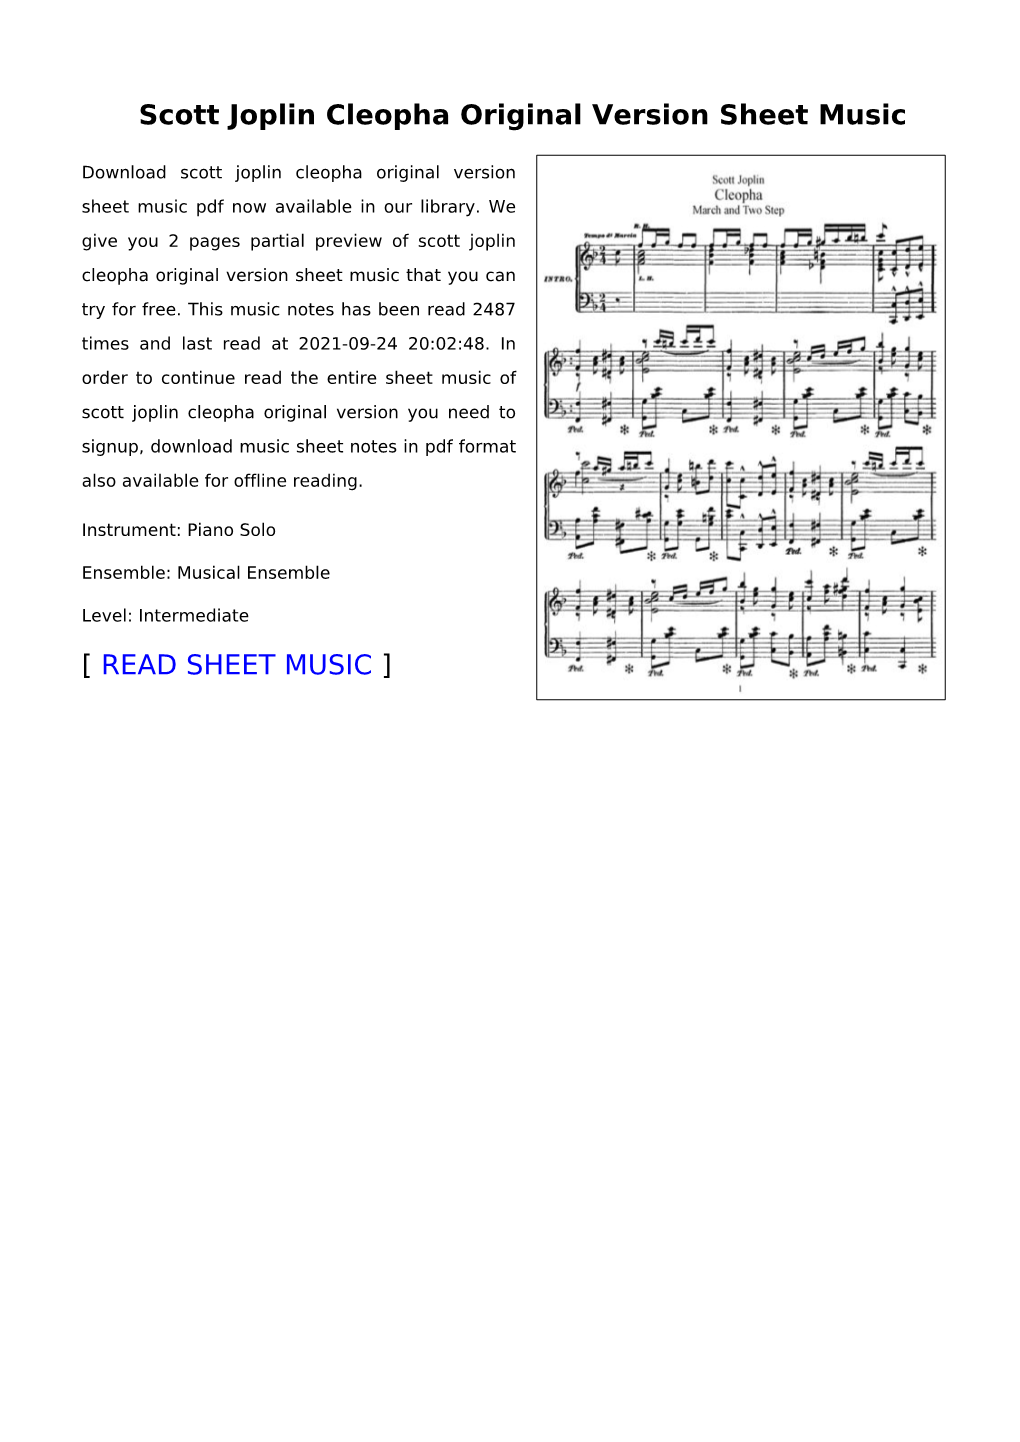 Sheet Music of Scott Joplin Cleopha Original Version You Need to Signup, Download Music Sheet Notes in Pdf Format Also Available for Offline Reading